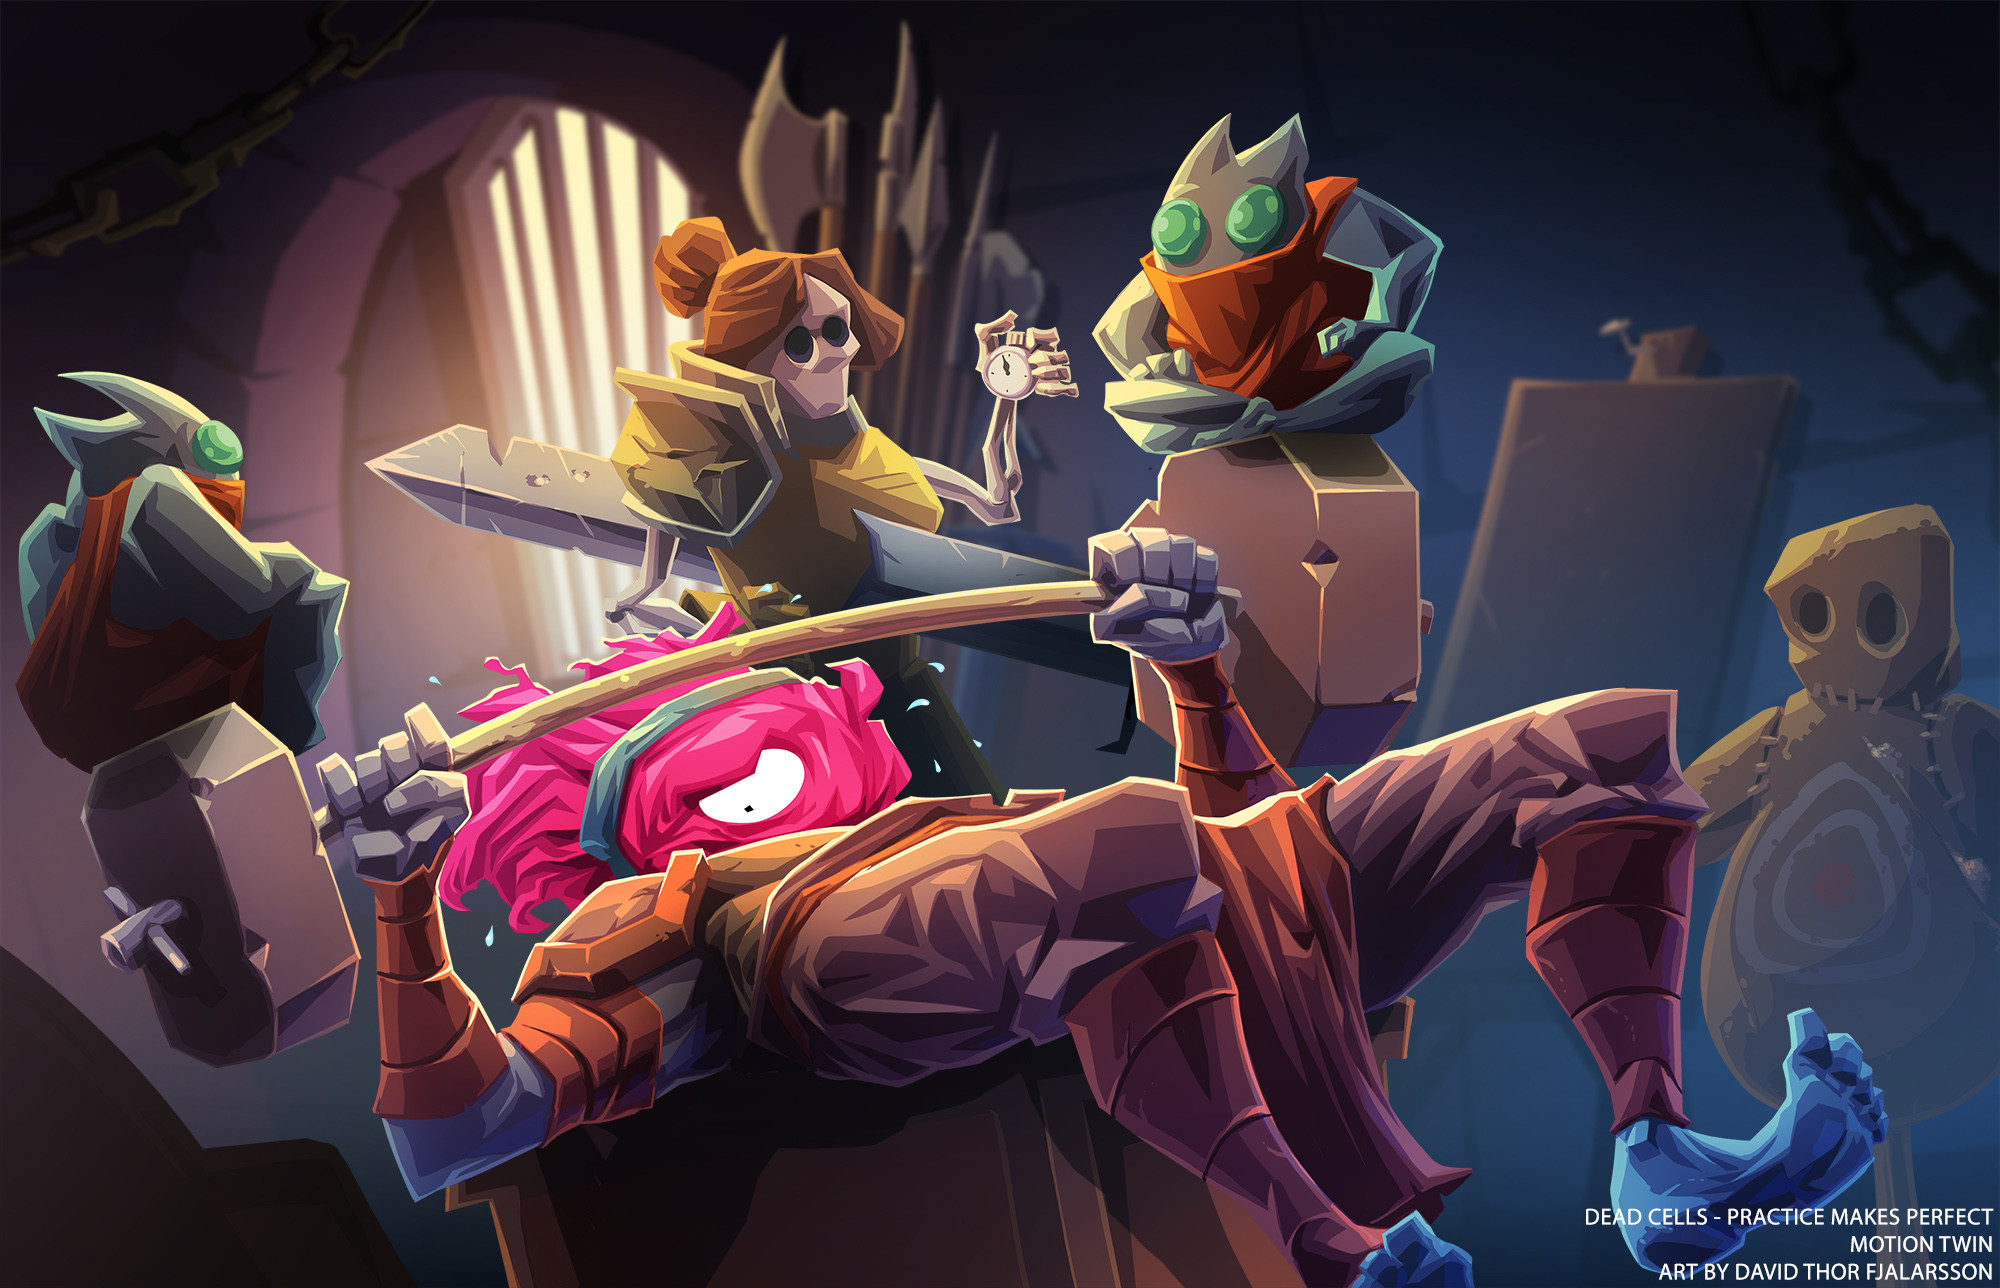 HD wallpaper featuring Dead Cells game characters in action for desktop background.